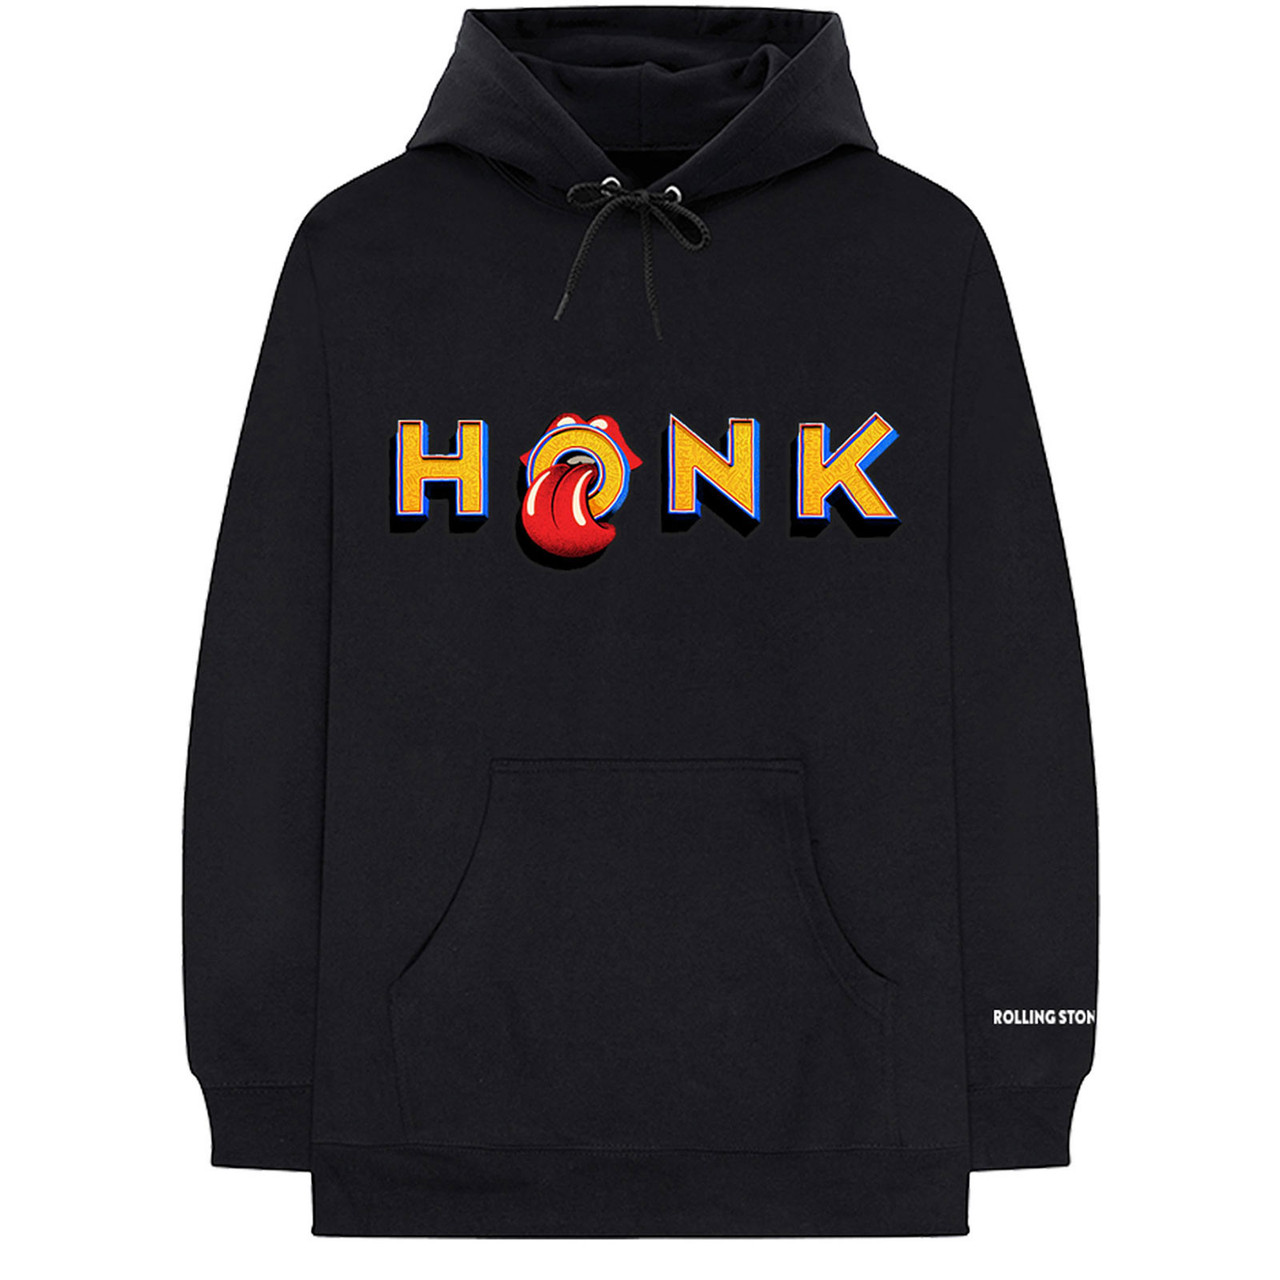 The Rolling Stones 'Honk Letters' (Black) Pull Over Hoodie